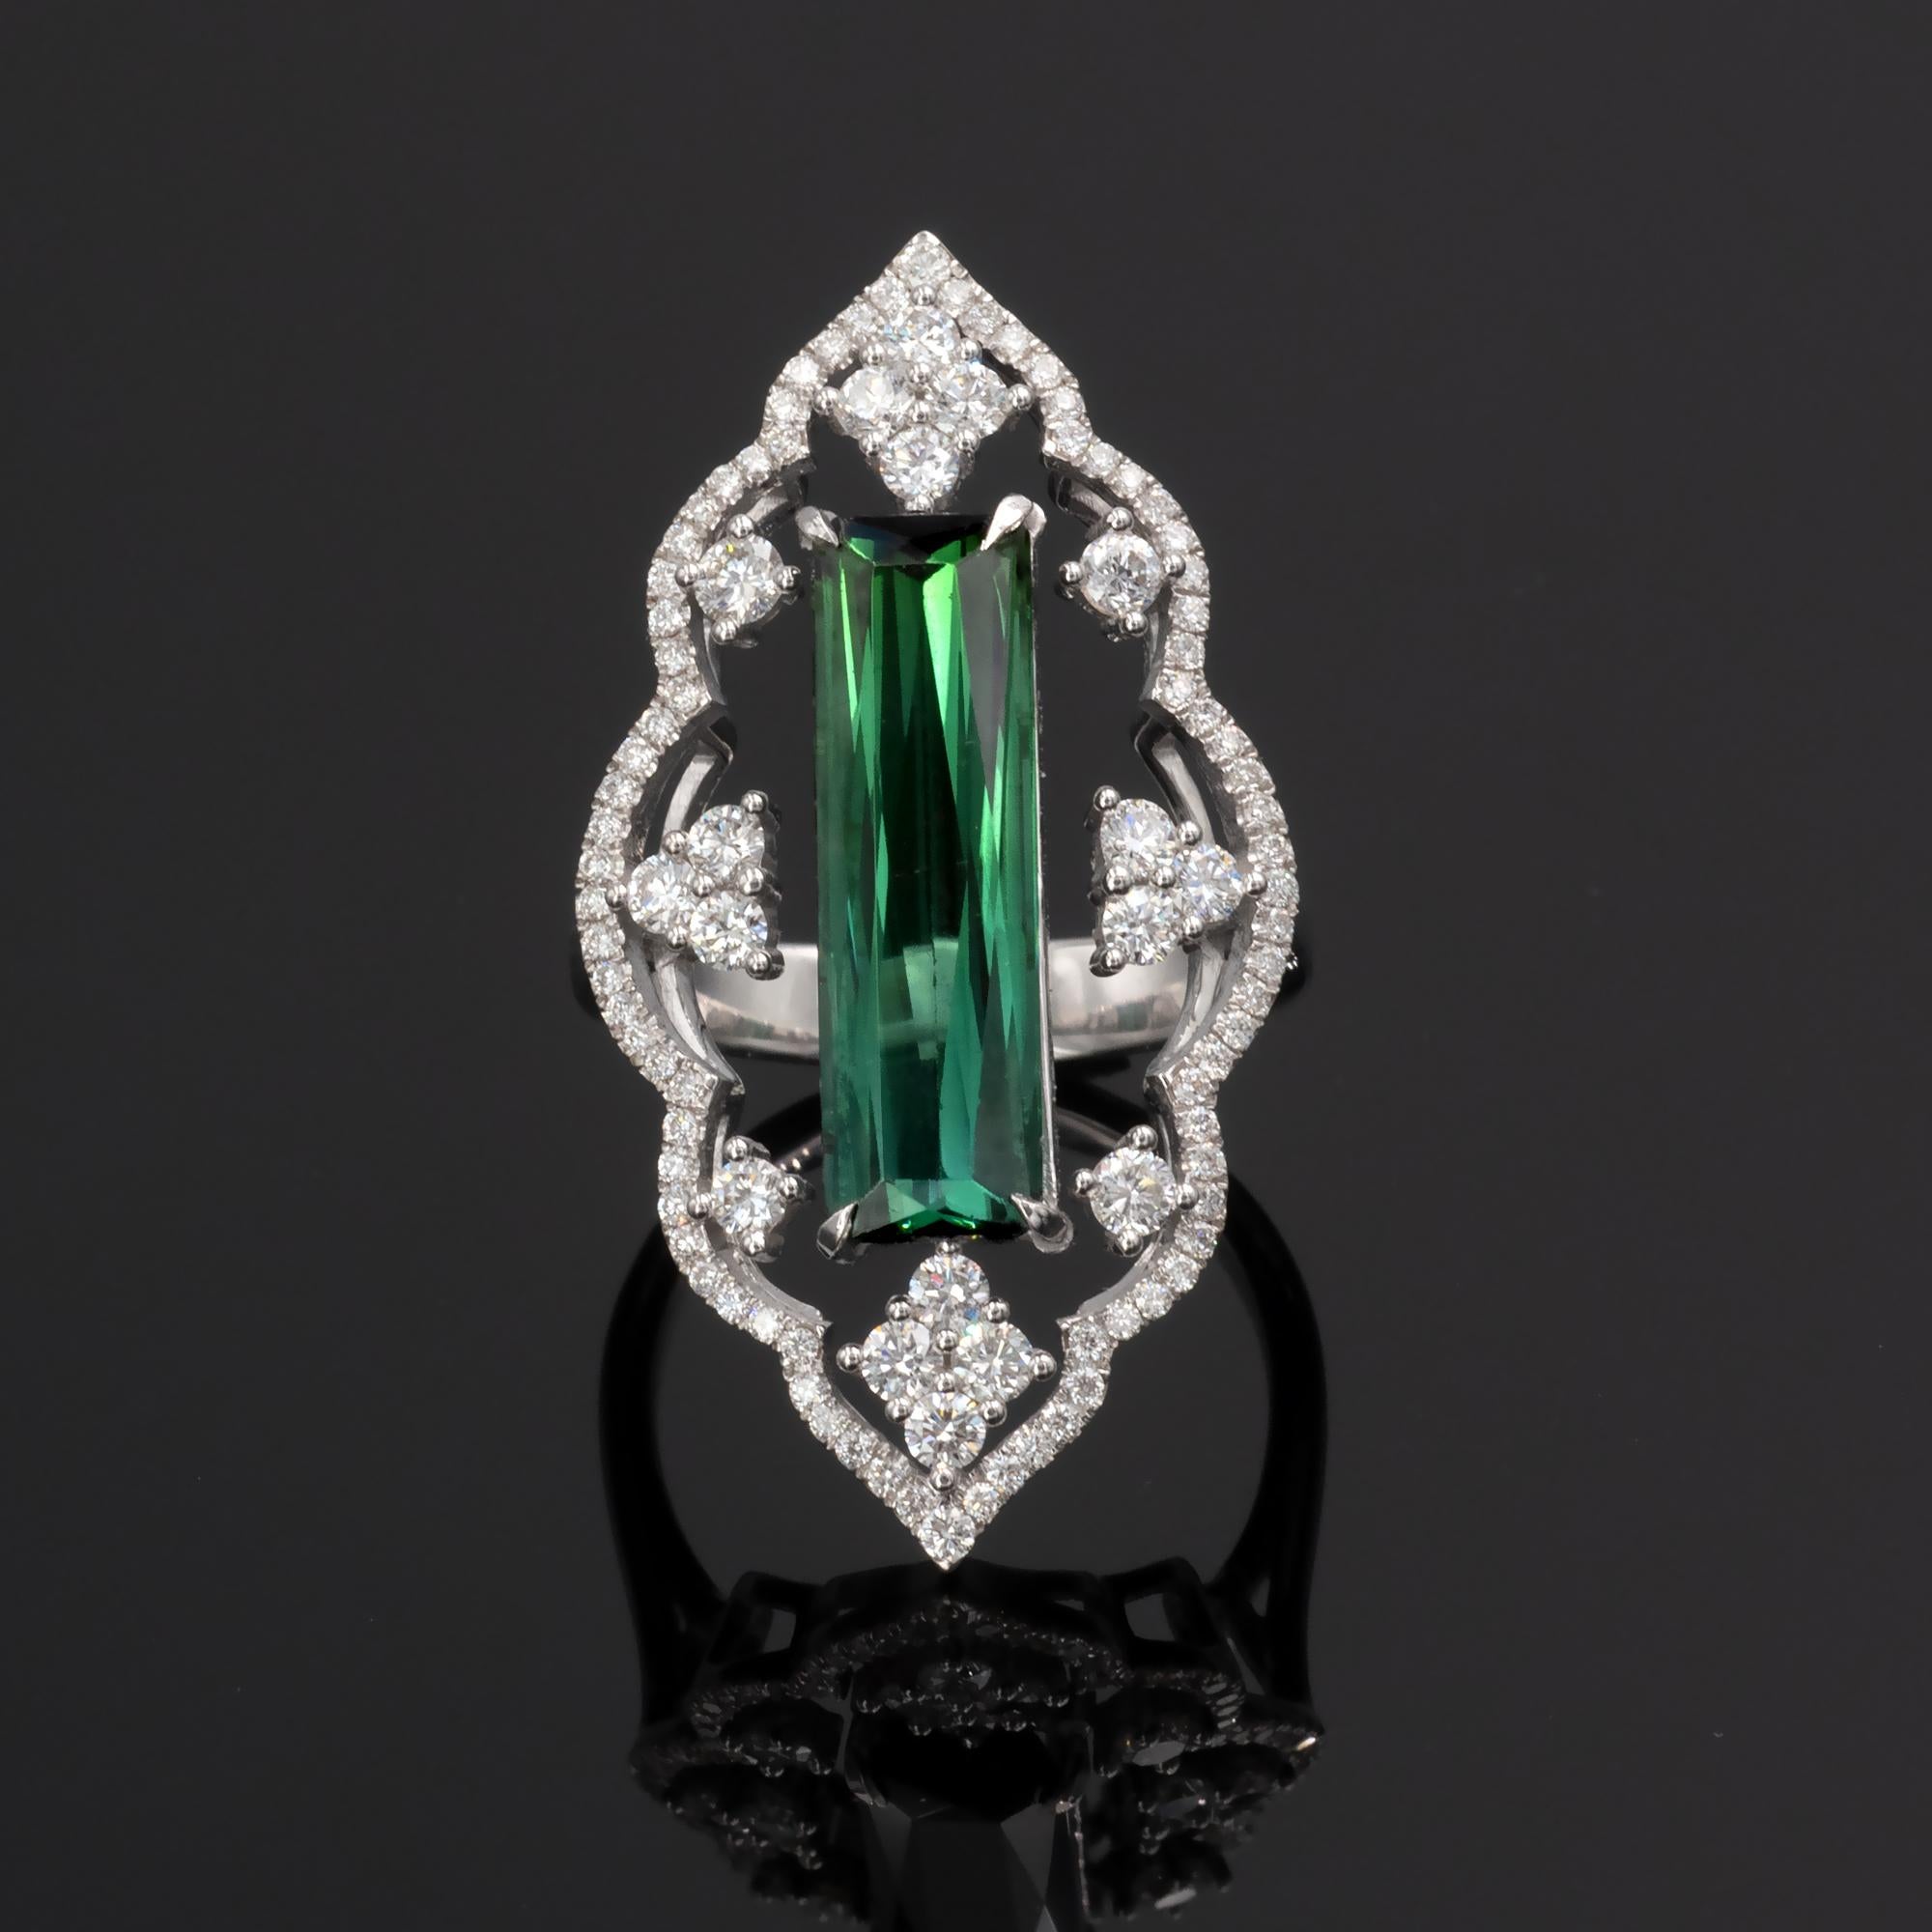 Lace like white gold and and tightly set diamond ring showcasing a long green tourmaline.
Diamonds : 1.22 carats (G VS or better), Tourmaline 4,46 carat
The ring bears the french 18 Karat hallmark stamp.

